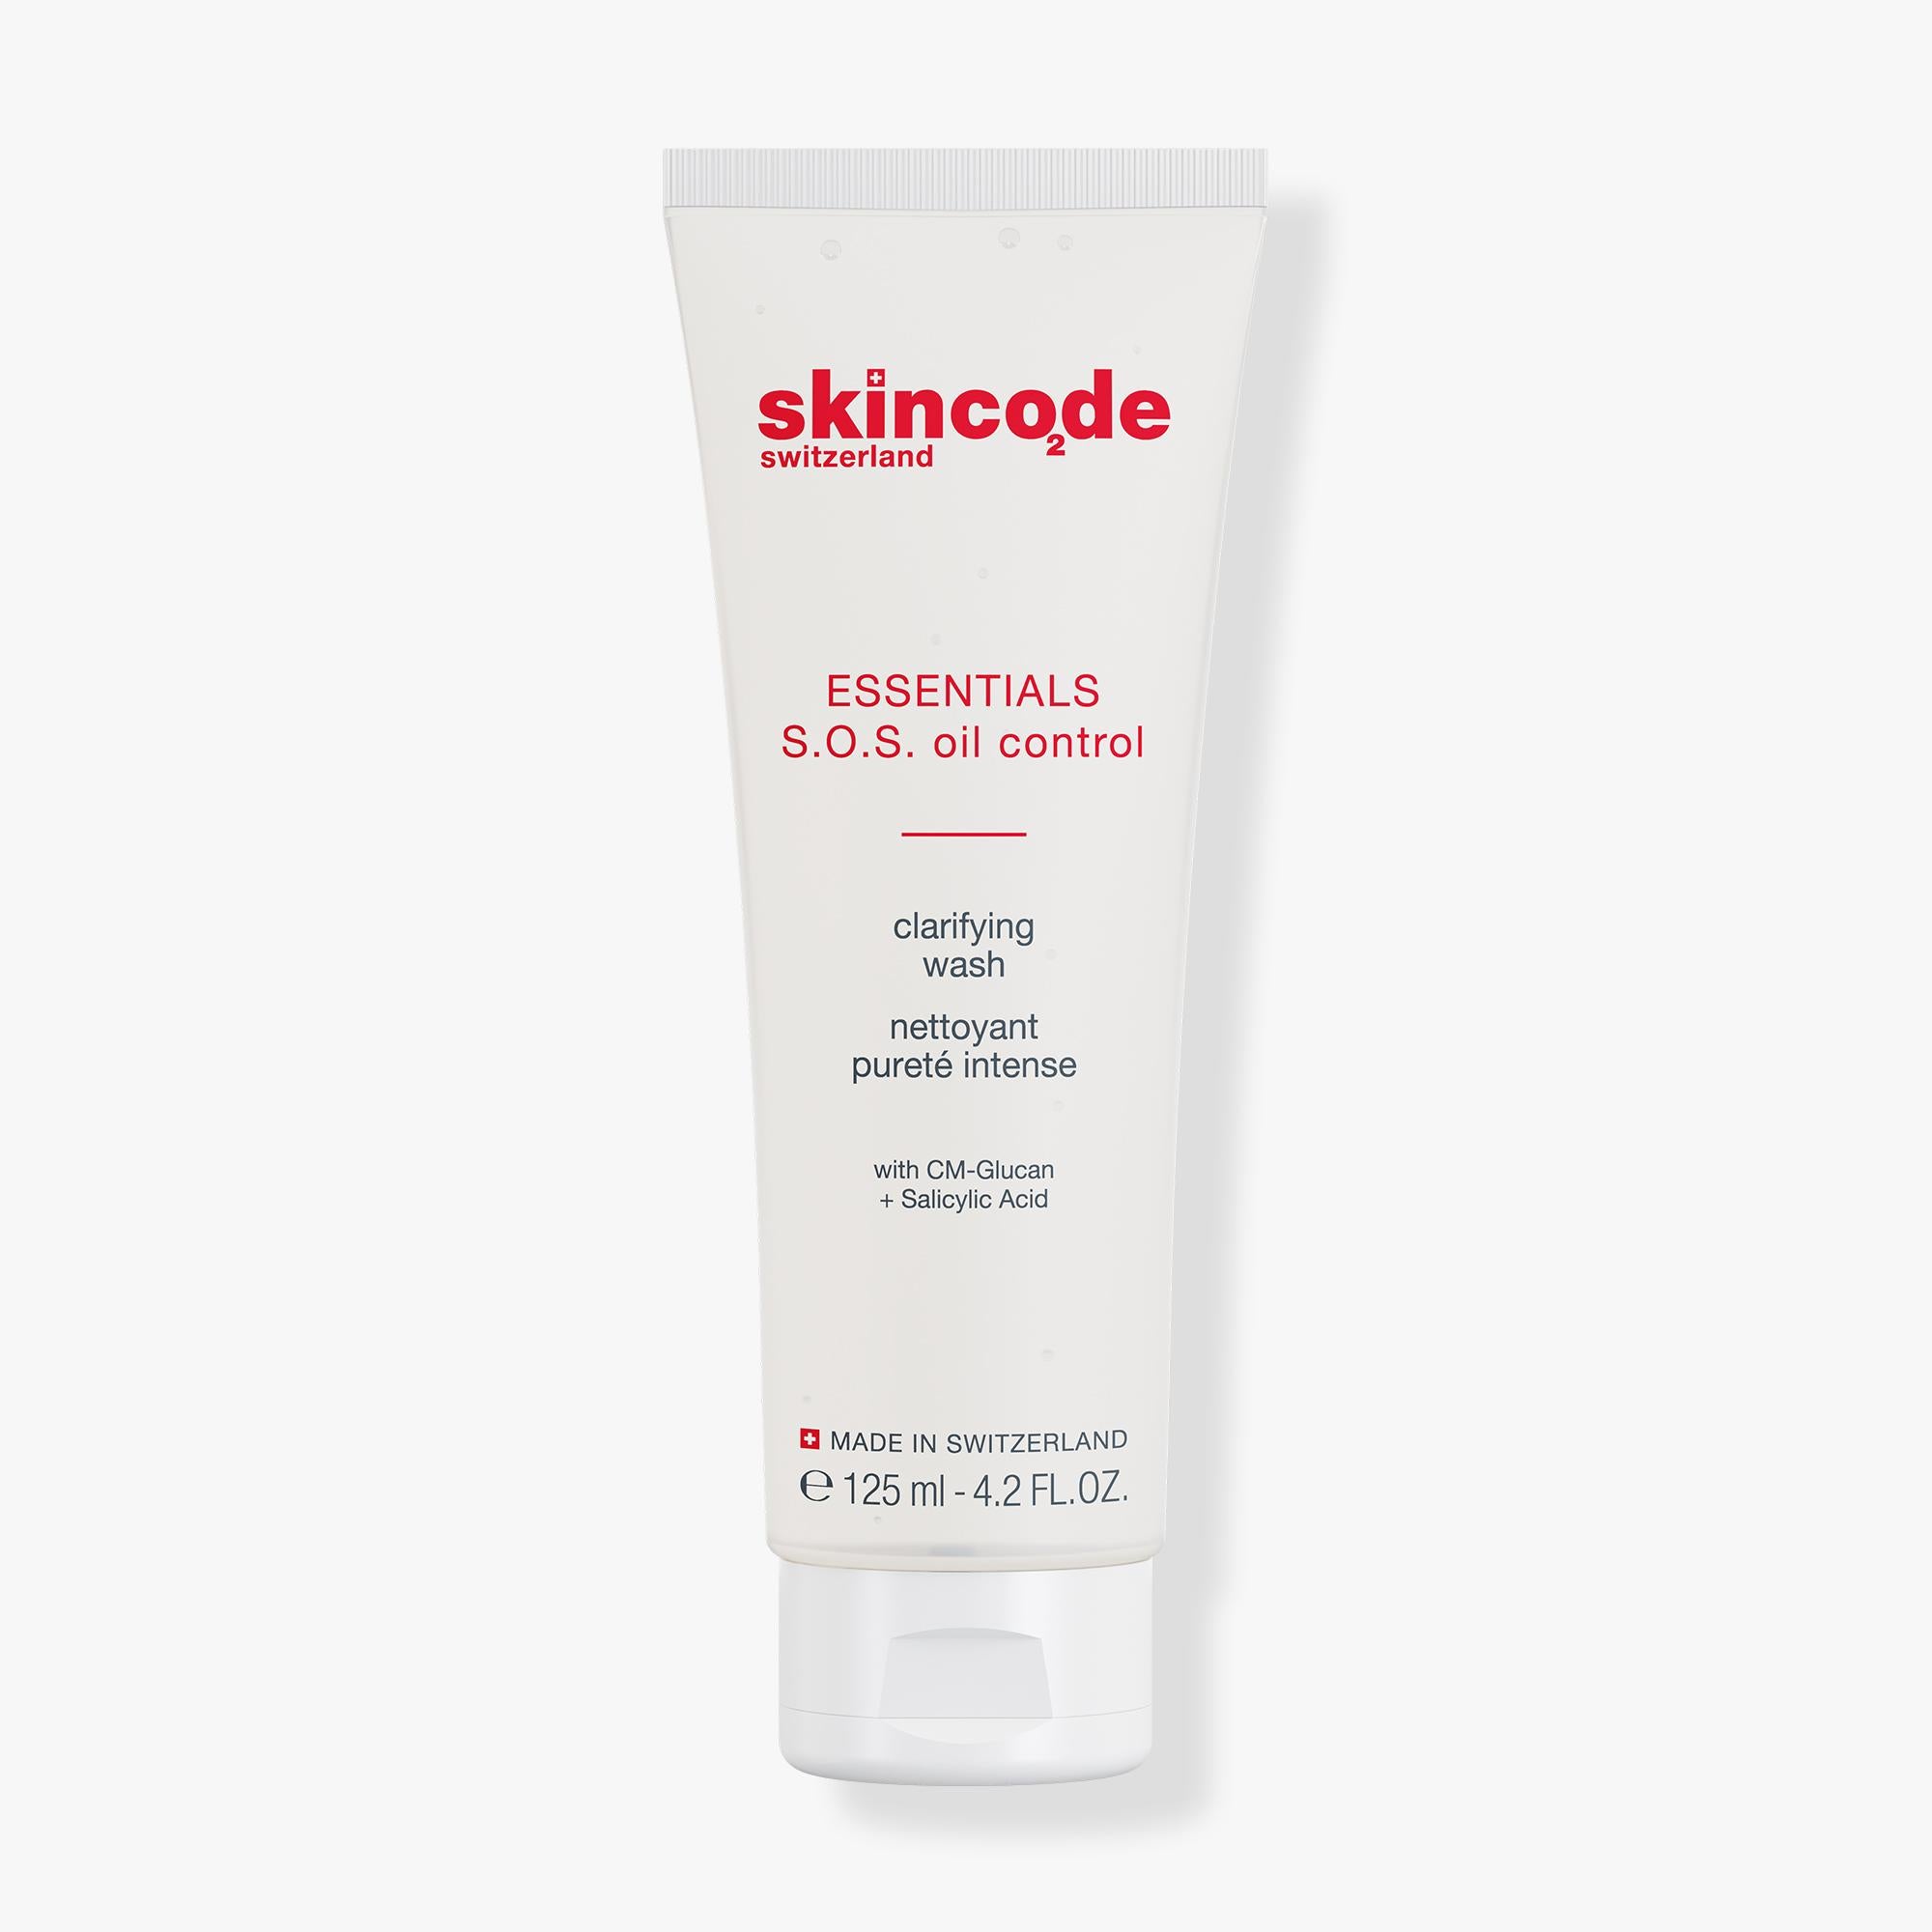 Skincode S.O.S Oil Control Clarifying Wash